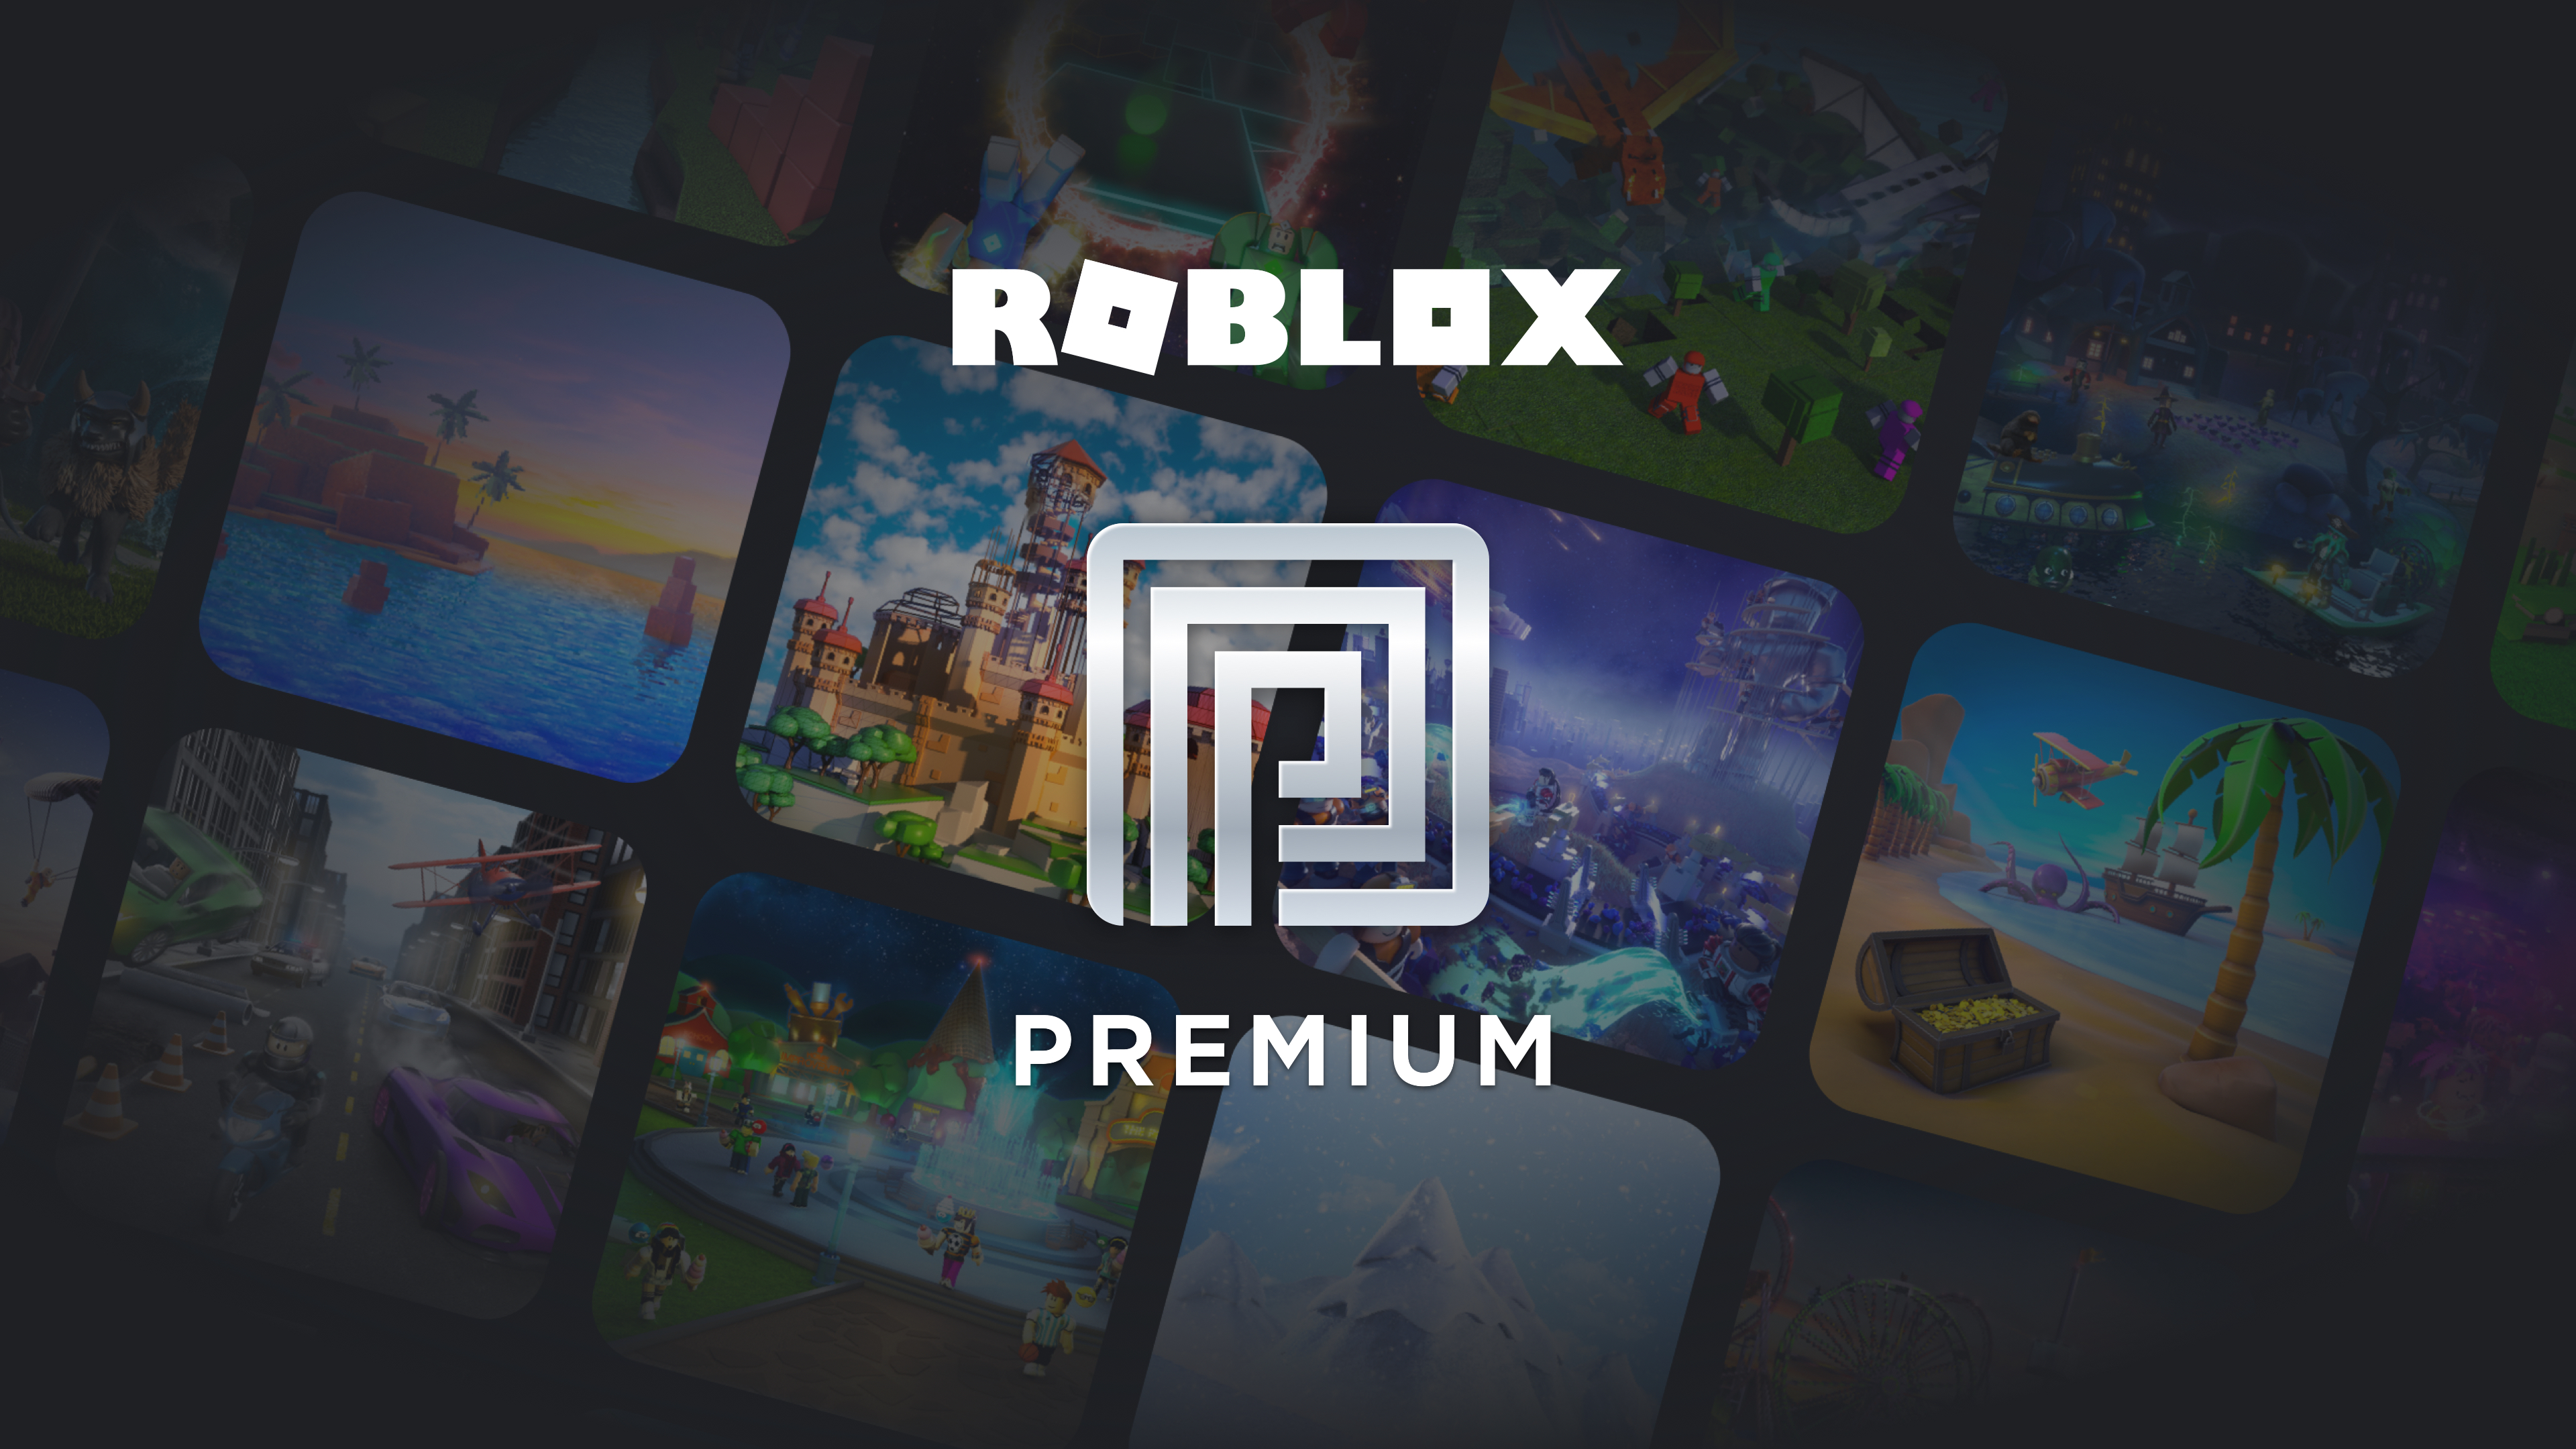 What Is Roblox Premium Payouts